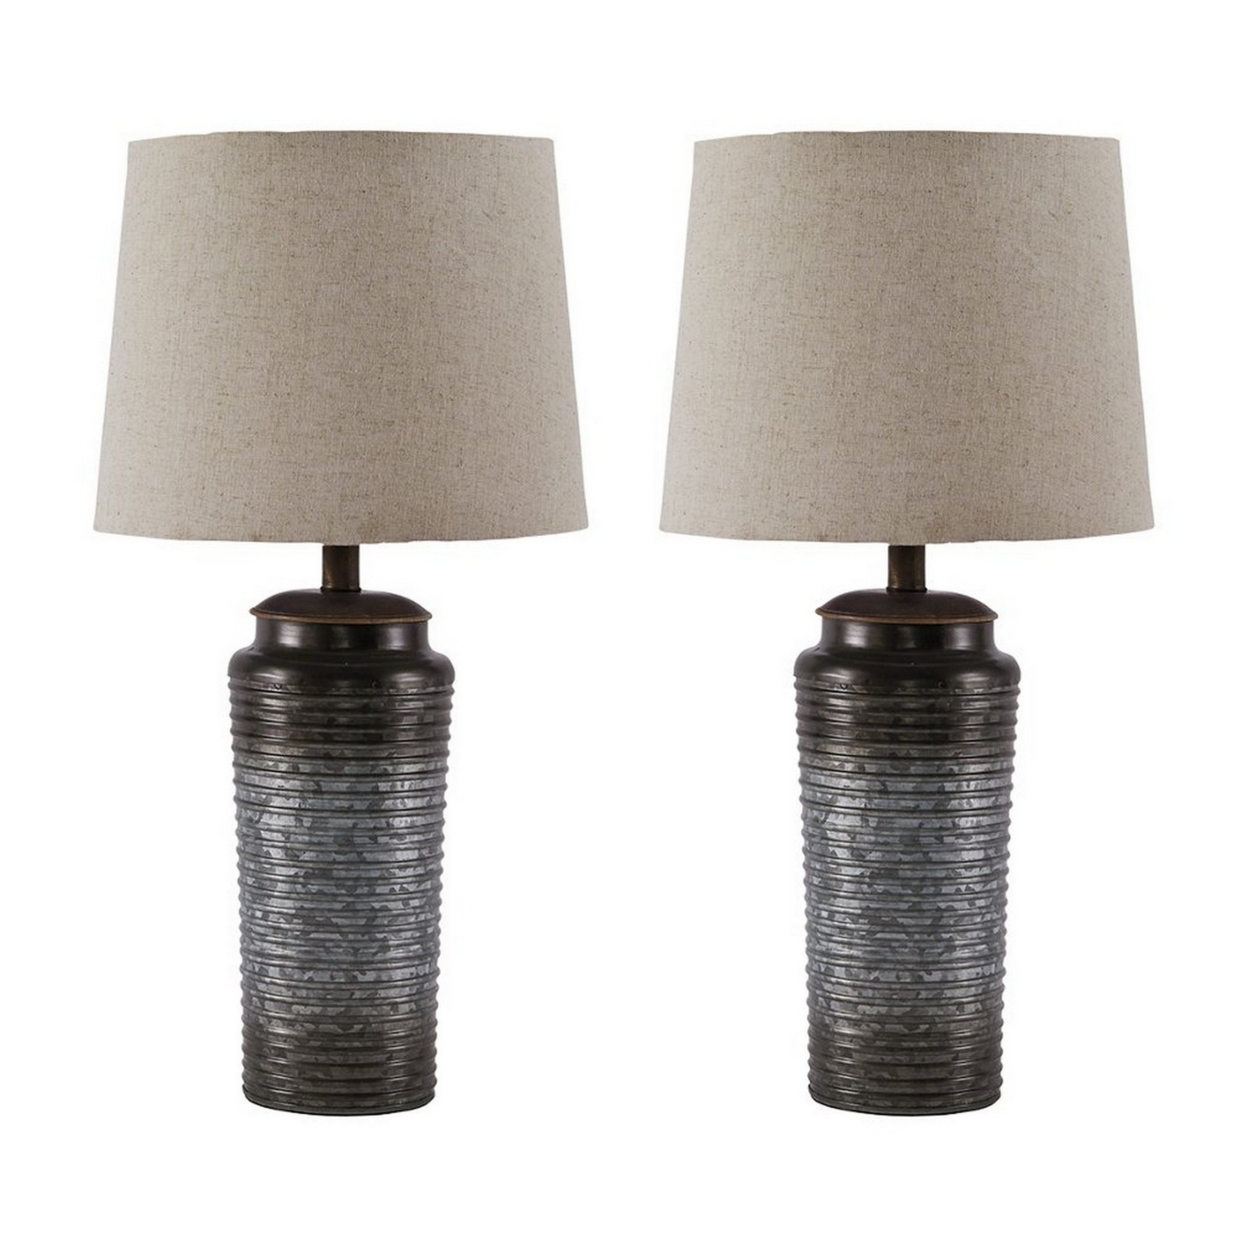 Ribbed Design Metal Body Table Lamp With Tapered Fabric Shade,Set Of 2,Gray- Saltoro Sherpi